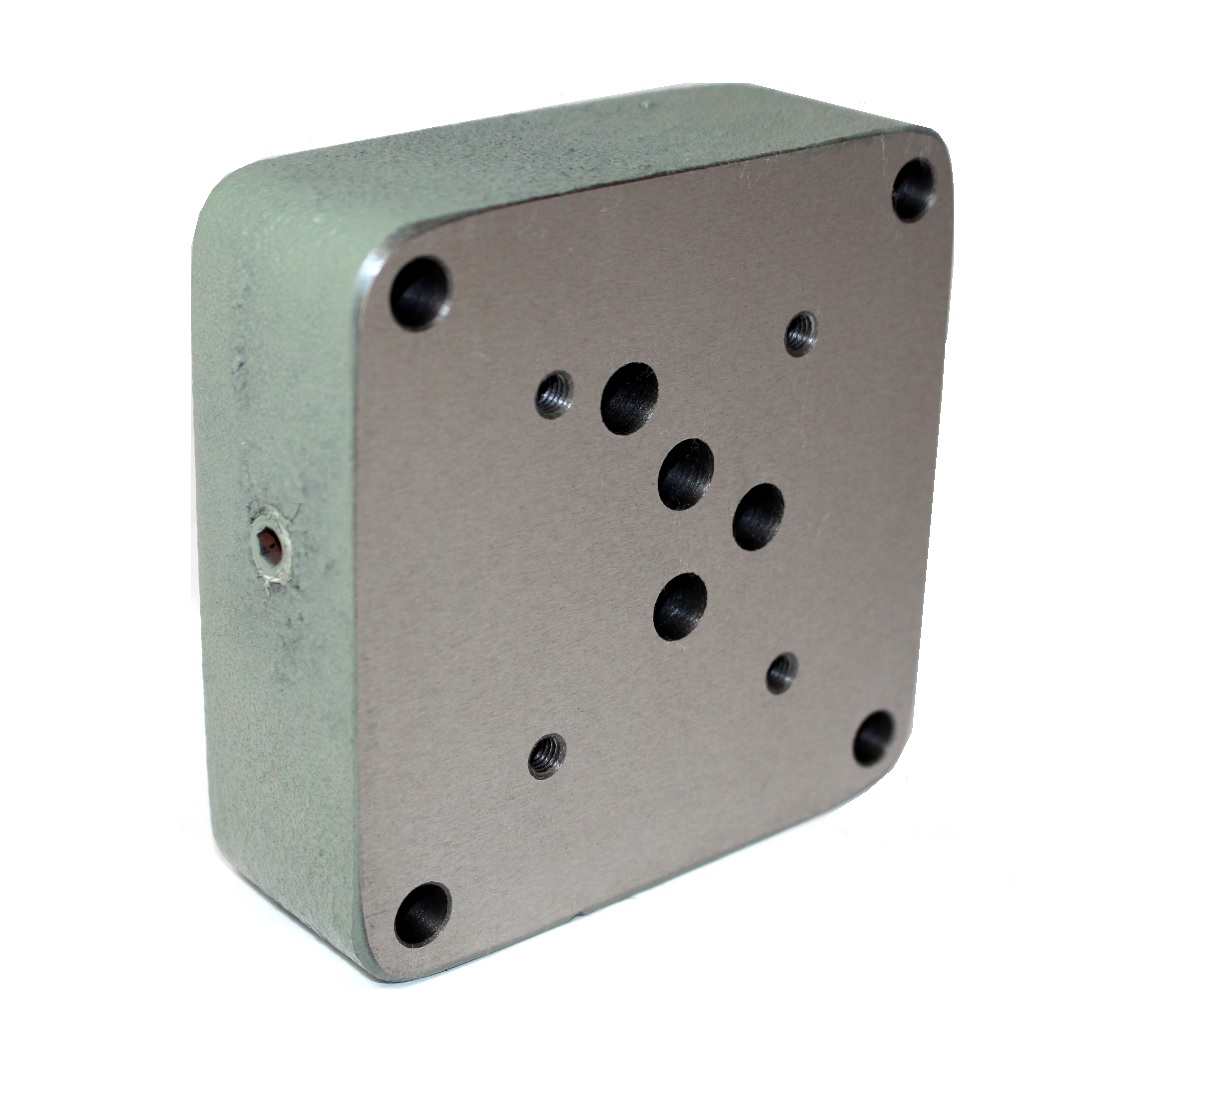 Flowfit hydraulic cetop 5 subplate with base entry 1/2" BSP P+T, A+B SIDE